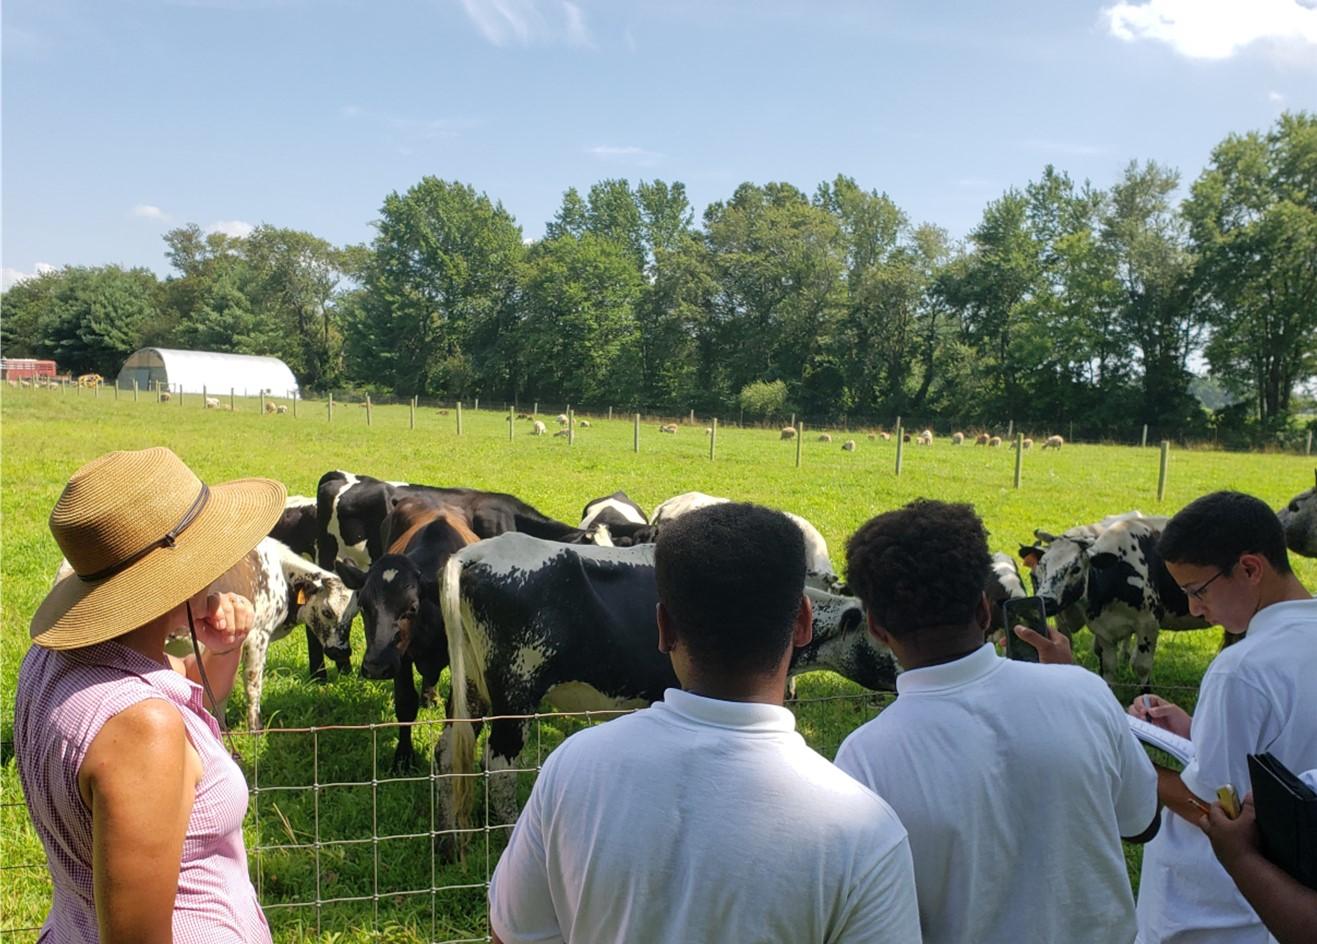  4-H Adult Volunteer and Youth Evaluating Dairy Cattle - 4-H volunteers arrange field trips like this trip to a local dairy farm. Youth can learn about careers and explore interests for careers they one day might like to pursue. 